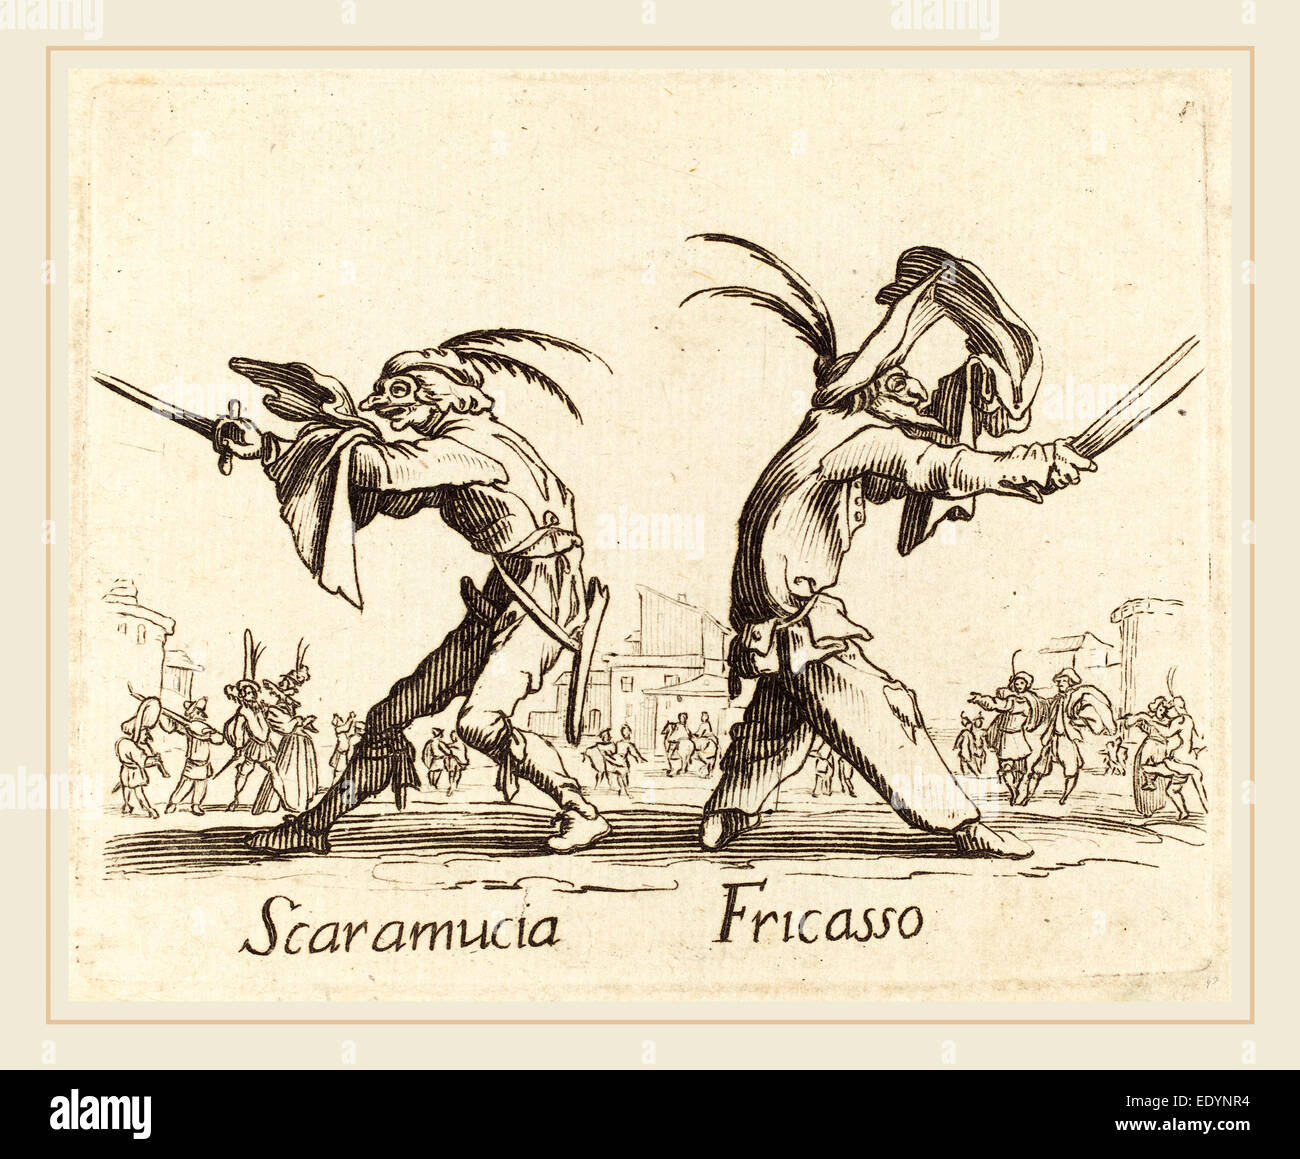 after Jacques Callot, Scaramucia and Fricasso, etching Stock Photo